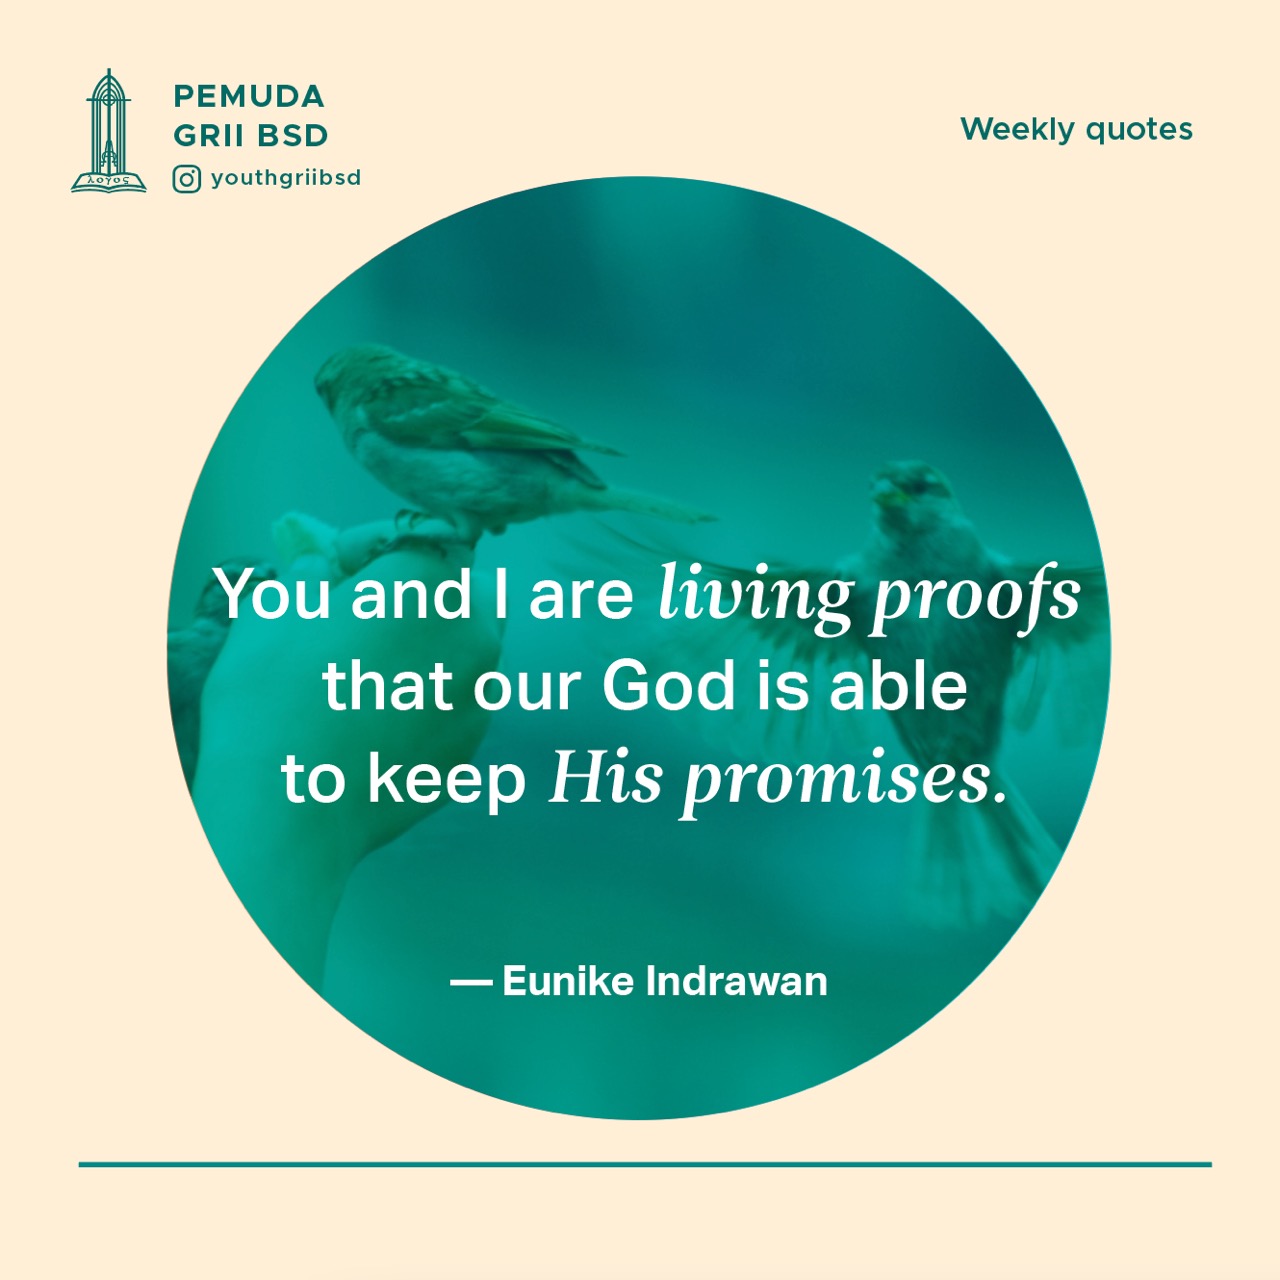 You and I are living proofs that our God is able to keep His promises.